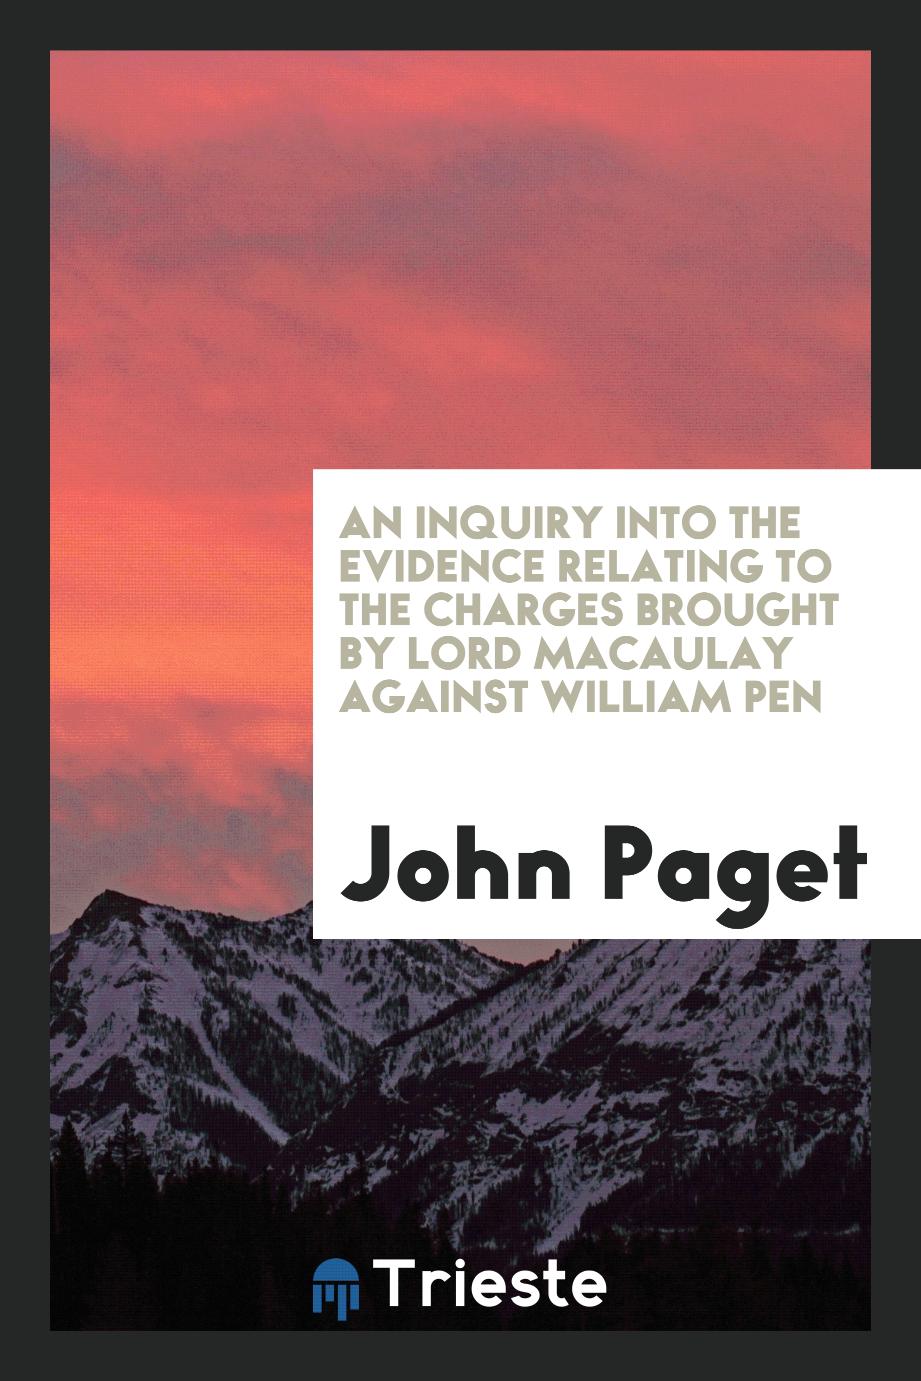 An Inquiry into the Evidence Relating to the Charges Brought by Lord Macaulay against William Pen